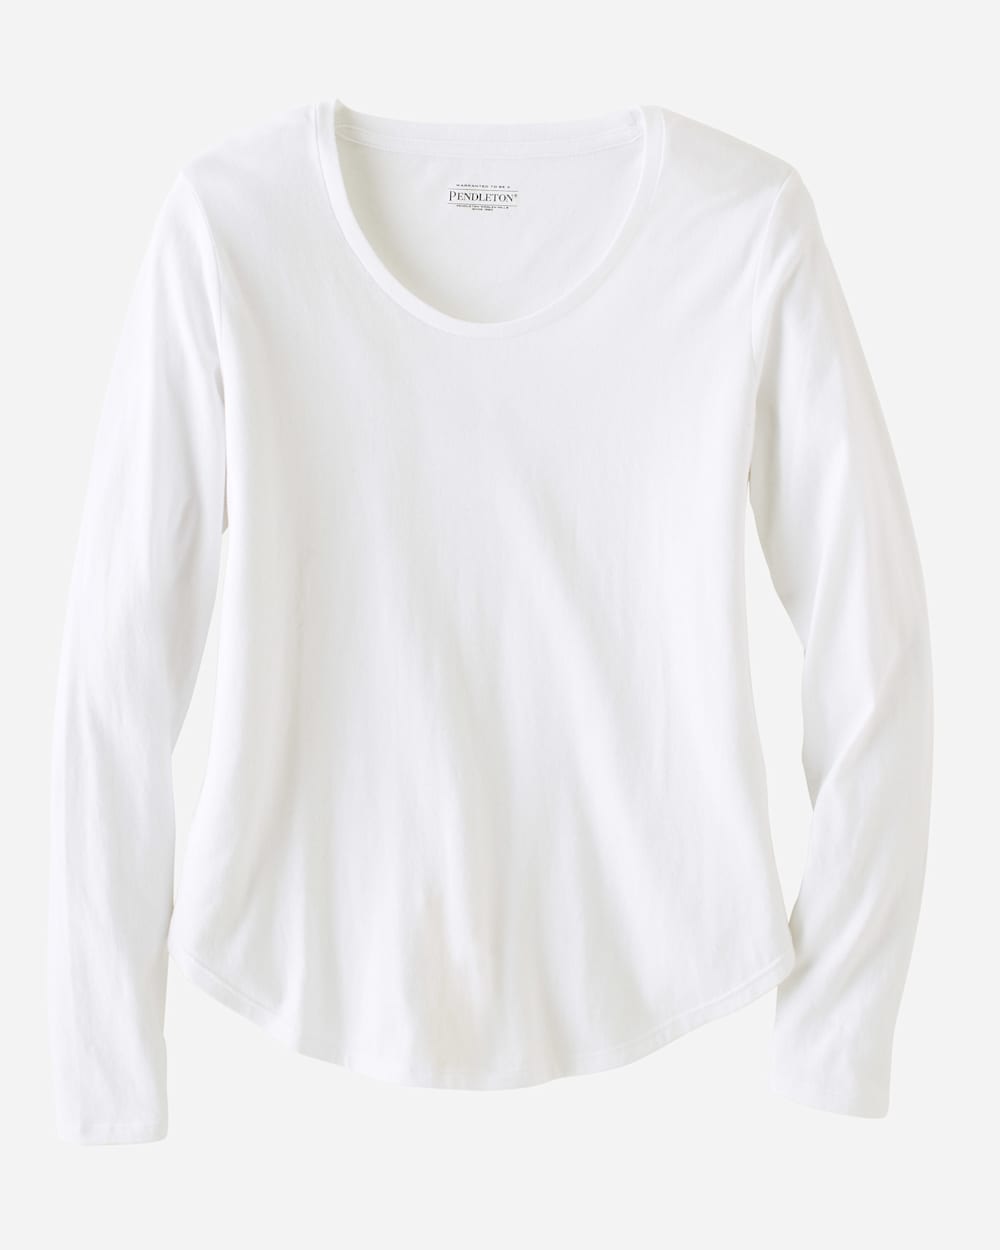 WOMEN'S LONG-SLEEVE JERSEY TEE IN WHITE image number 1